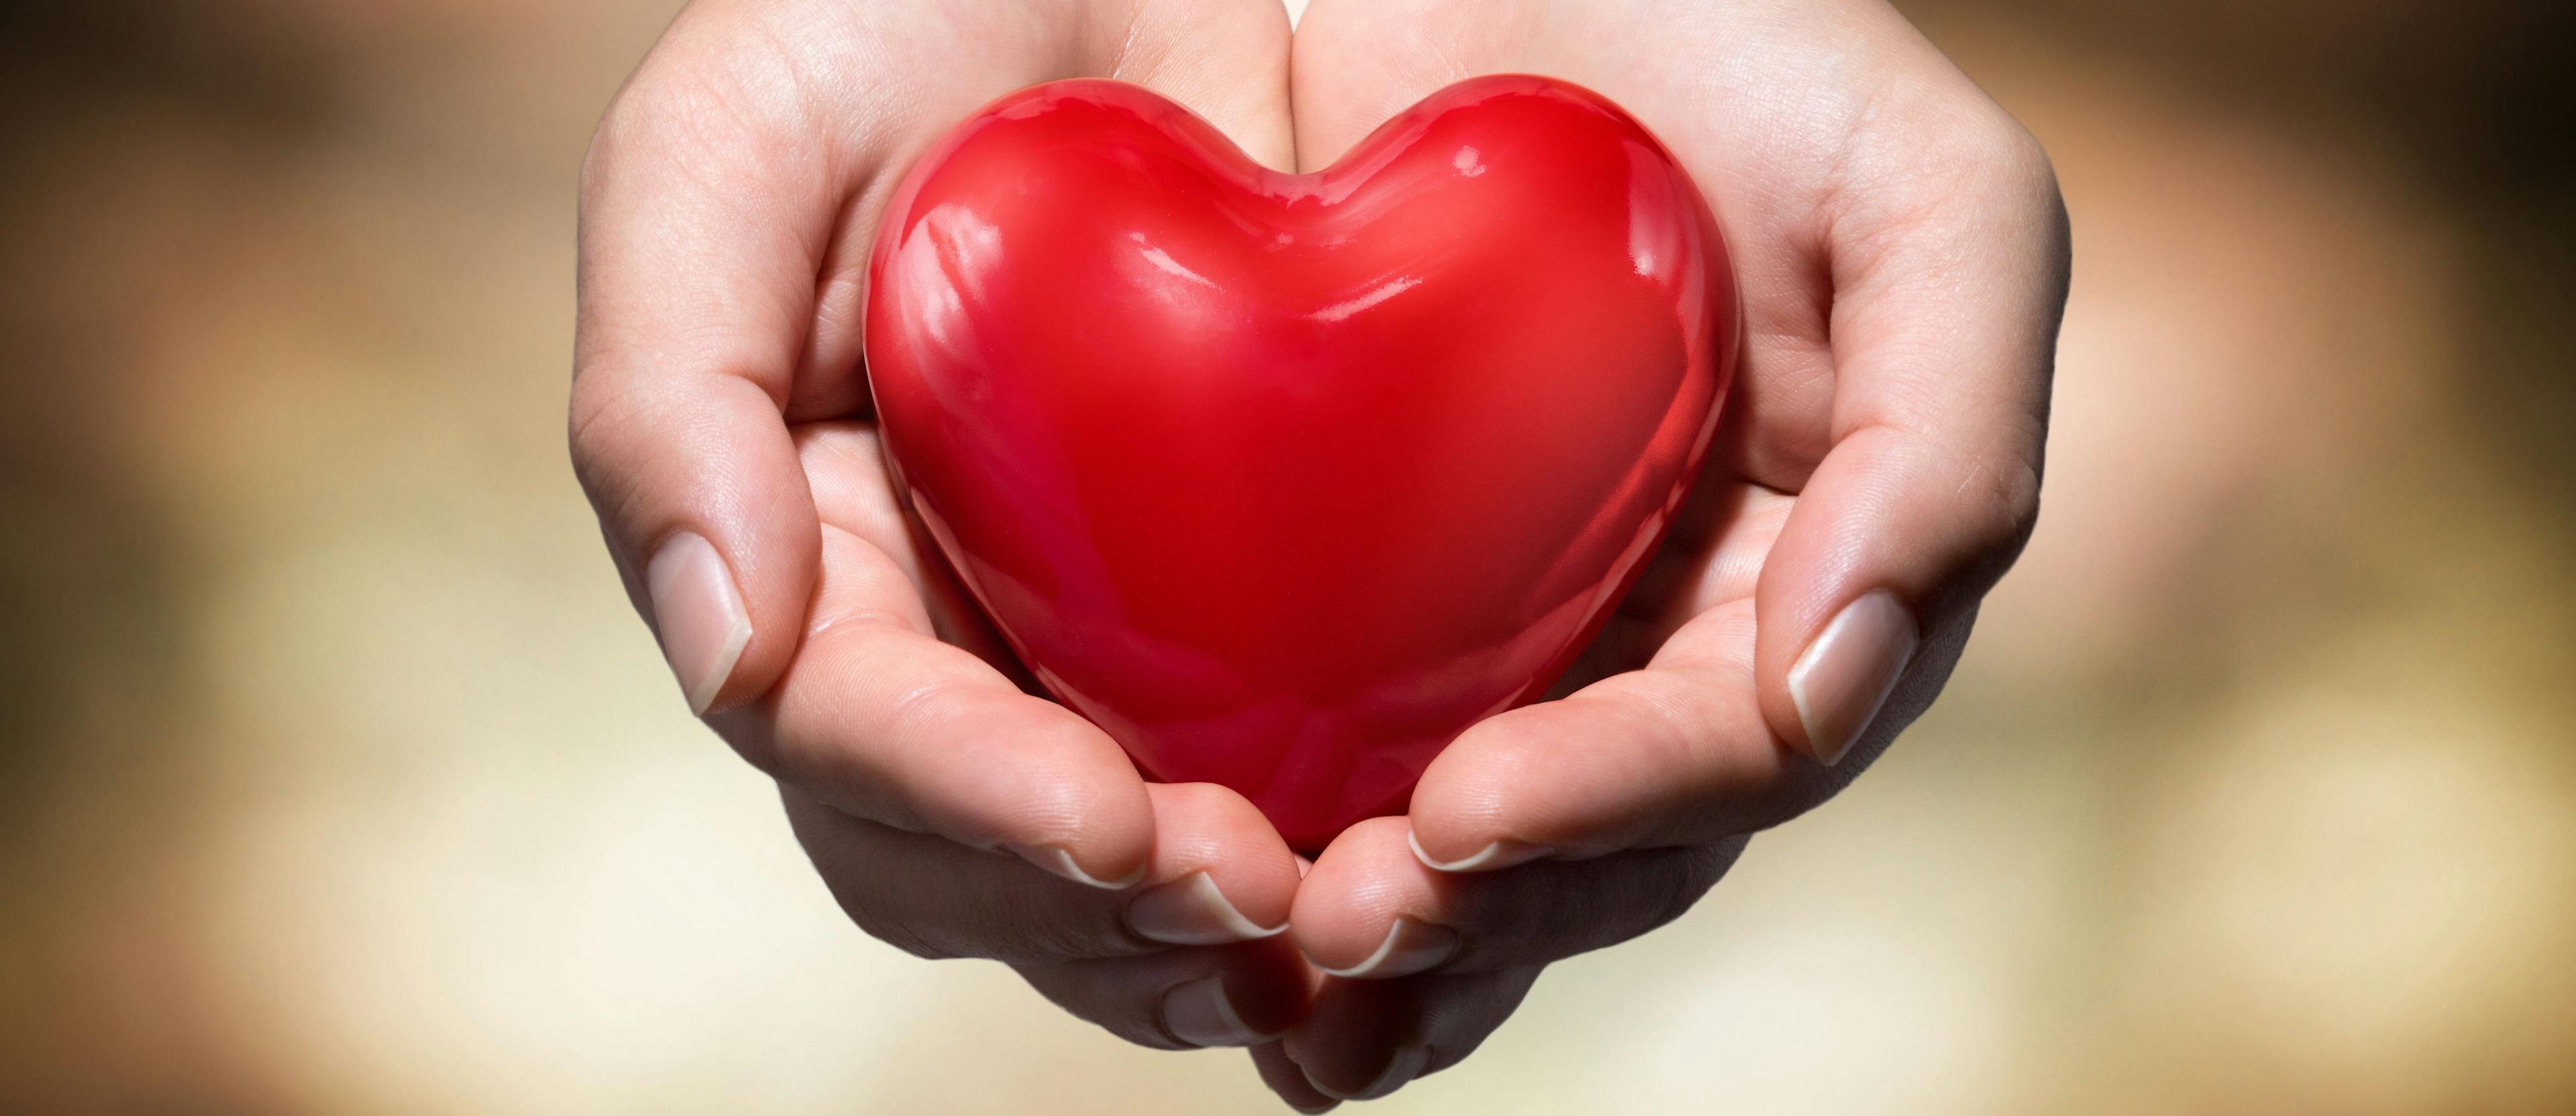 Women's Heart Health Impacted by Traumatic Life Events